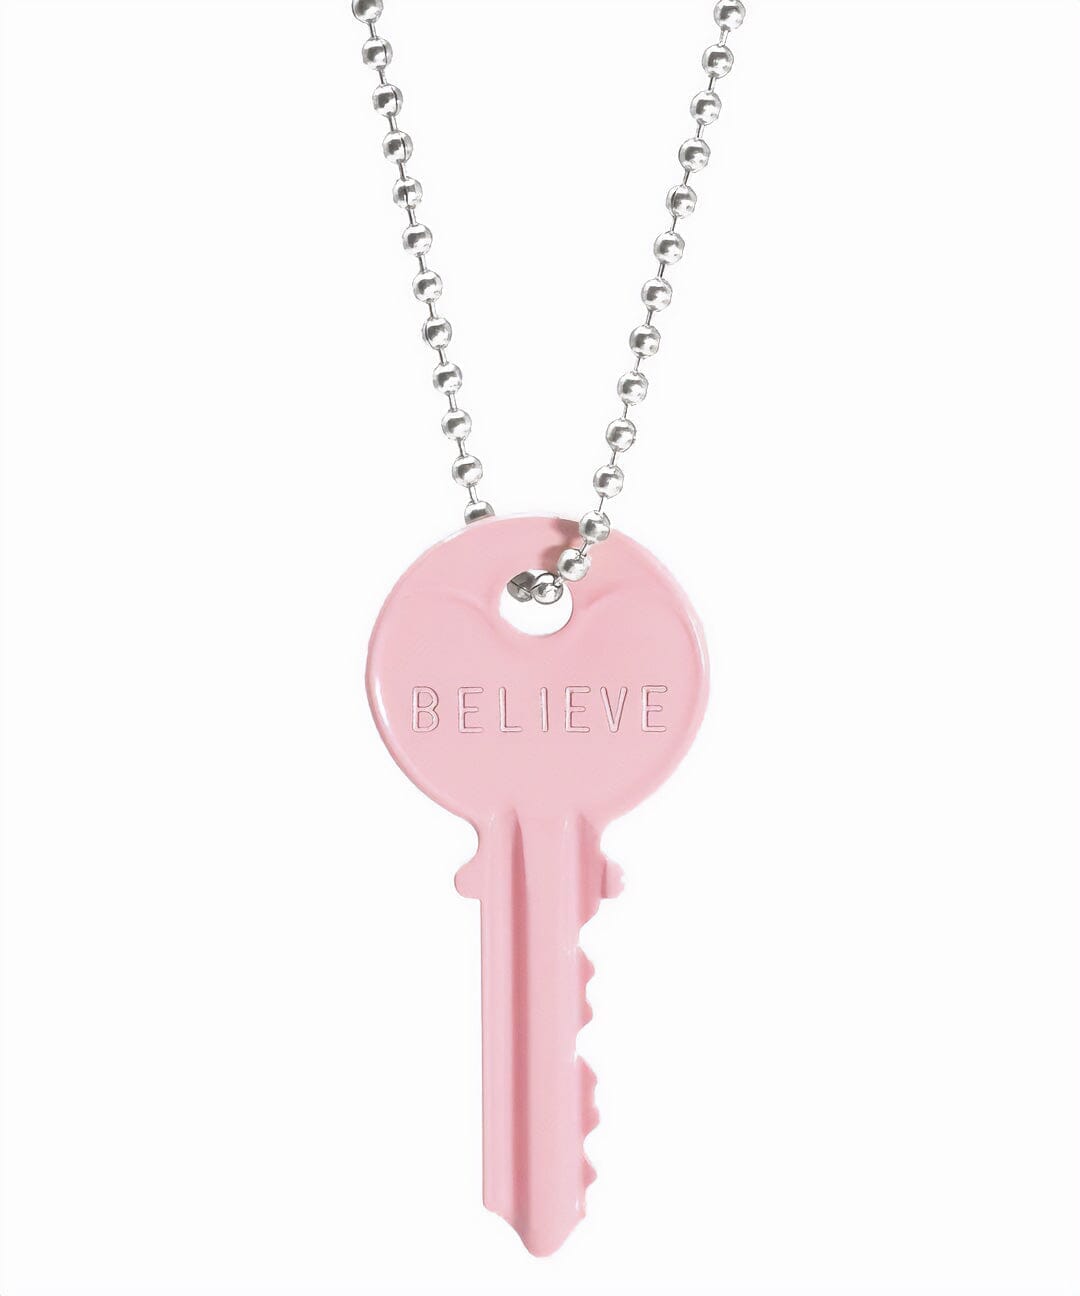 N - Pastel Pink Classic Ball Chain Key Necklace Necklaces The Giving Keys Silver 